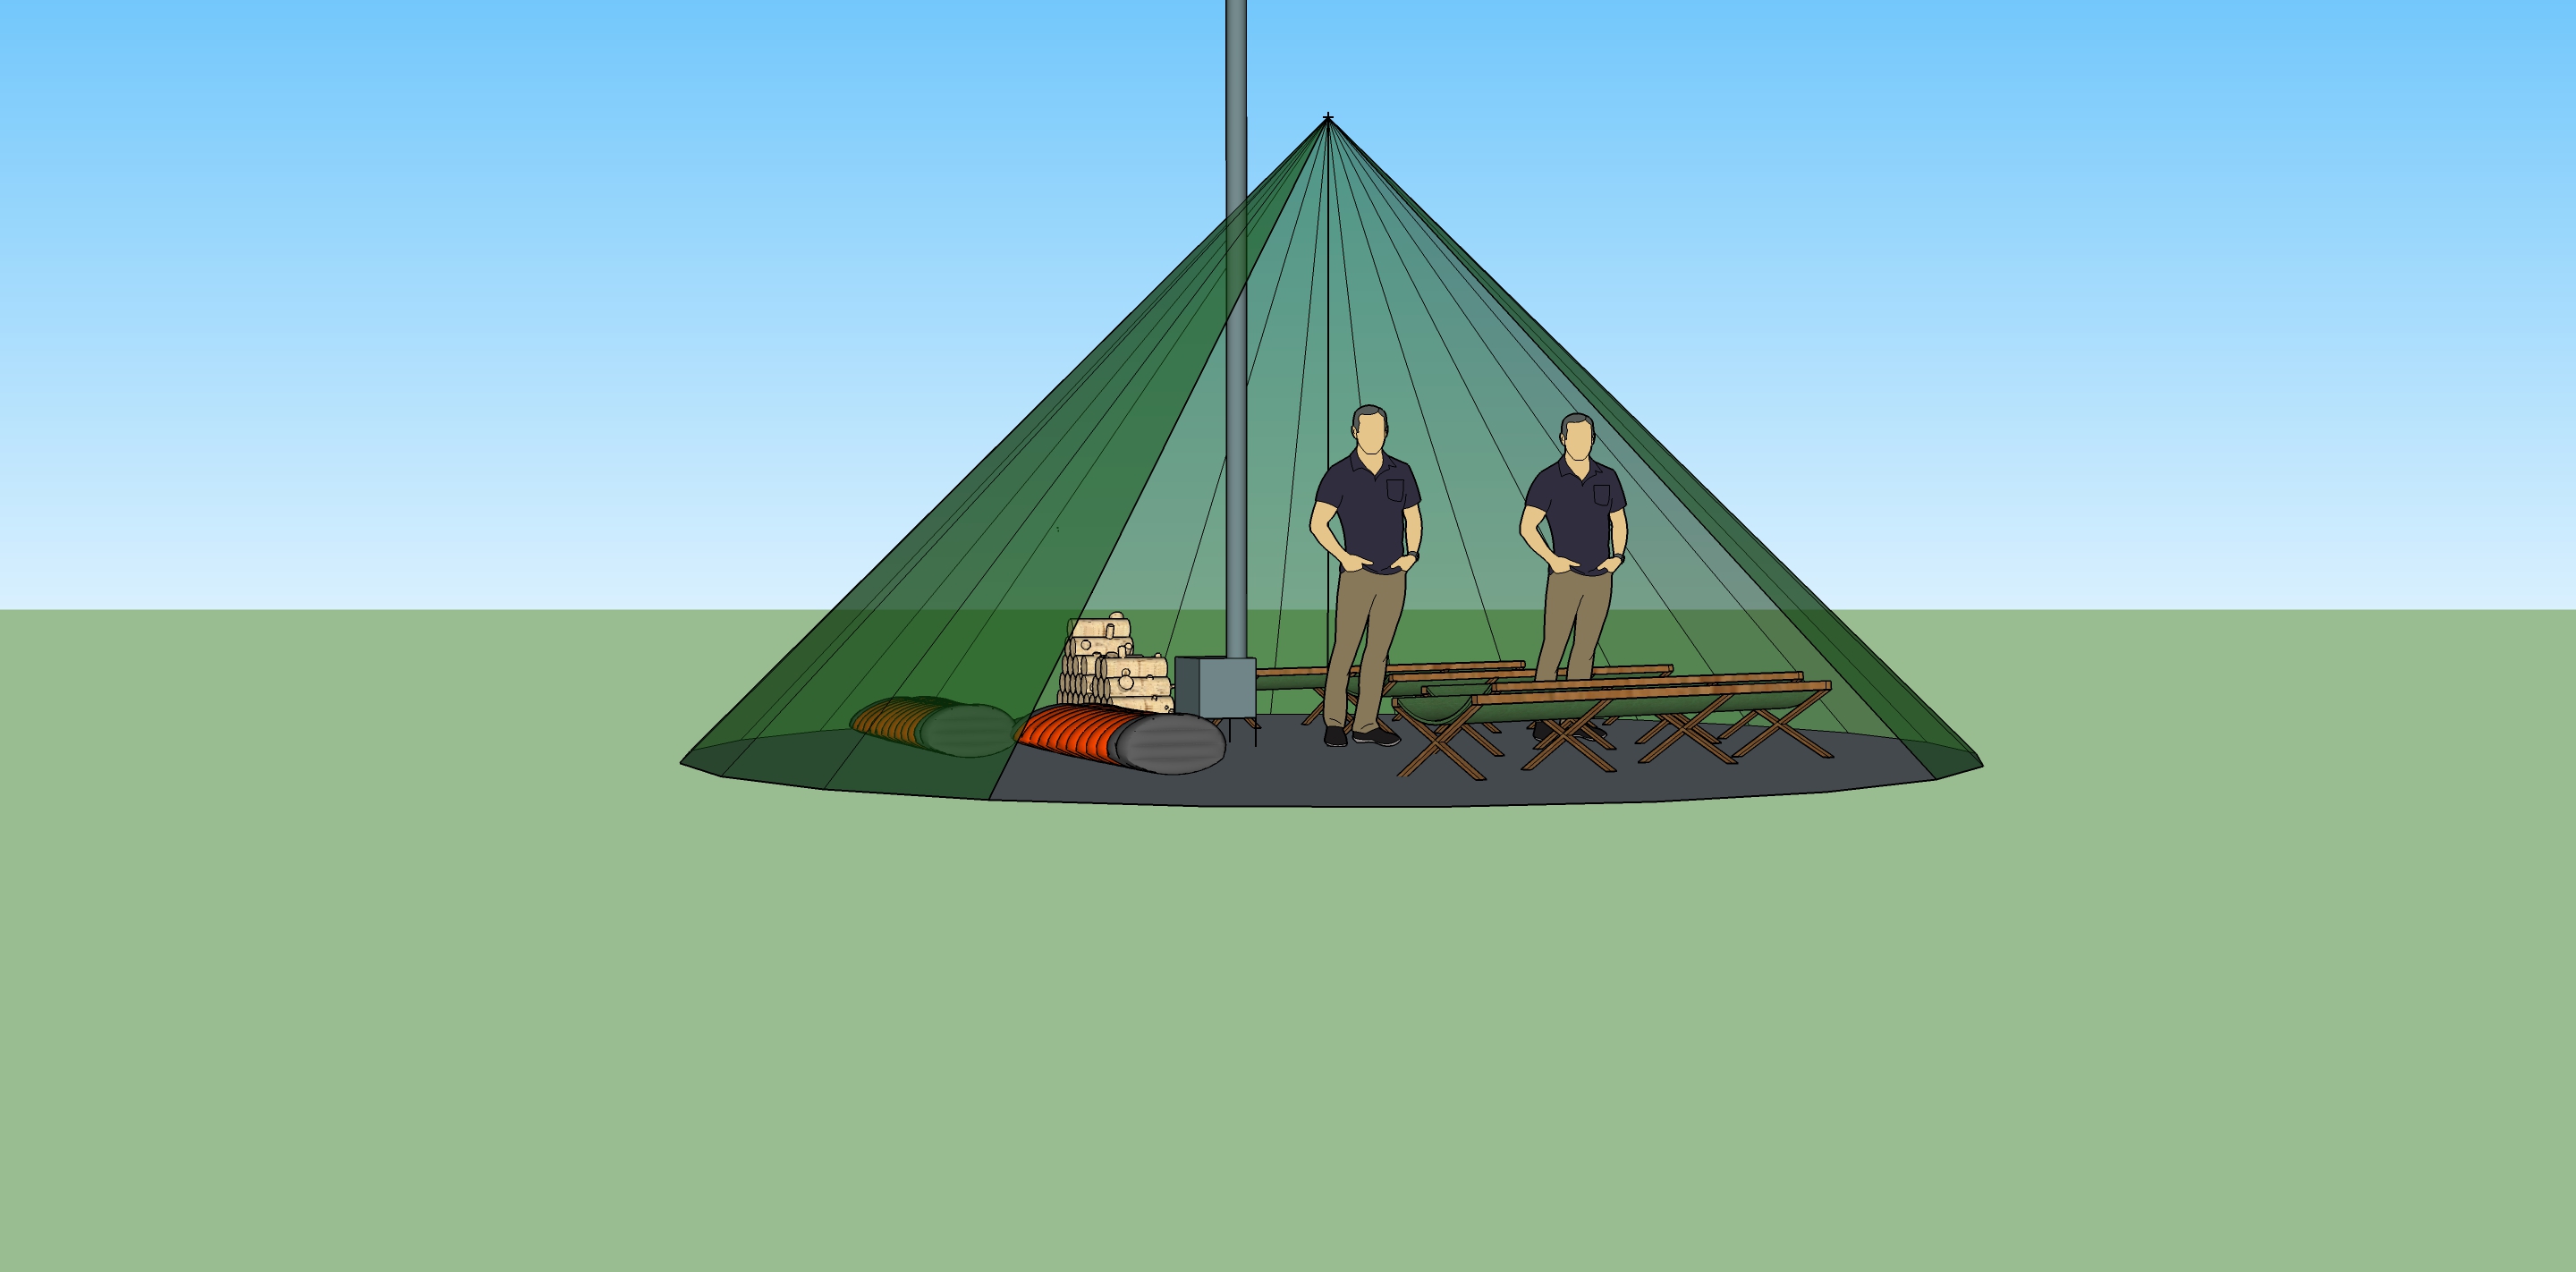 Tent Comparisons and Drawings - Seek Outside